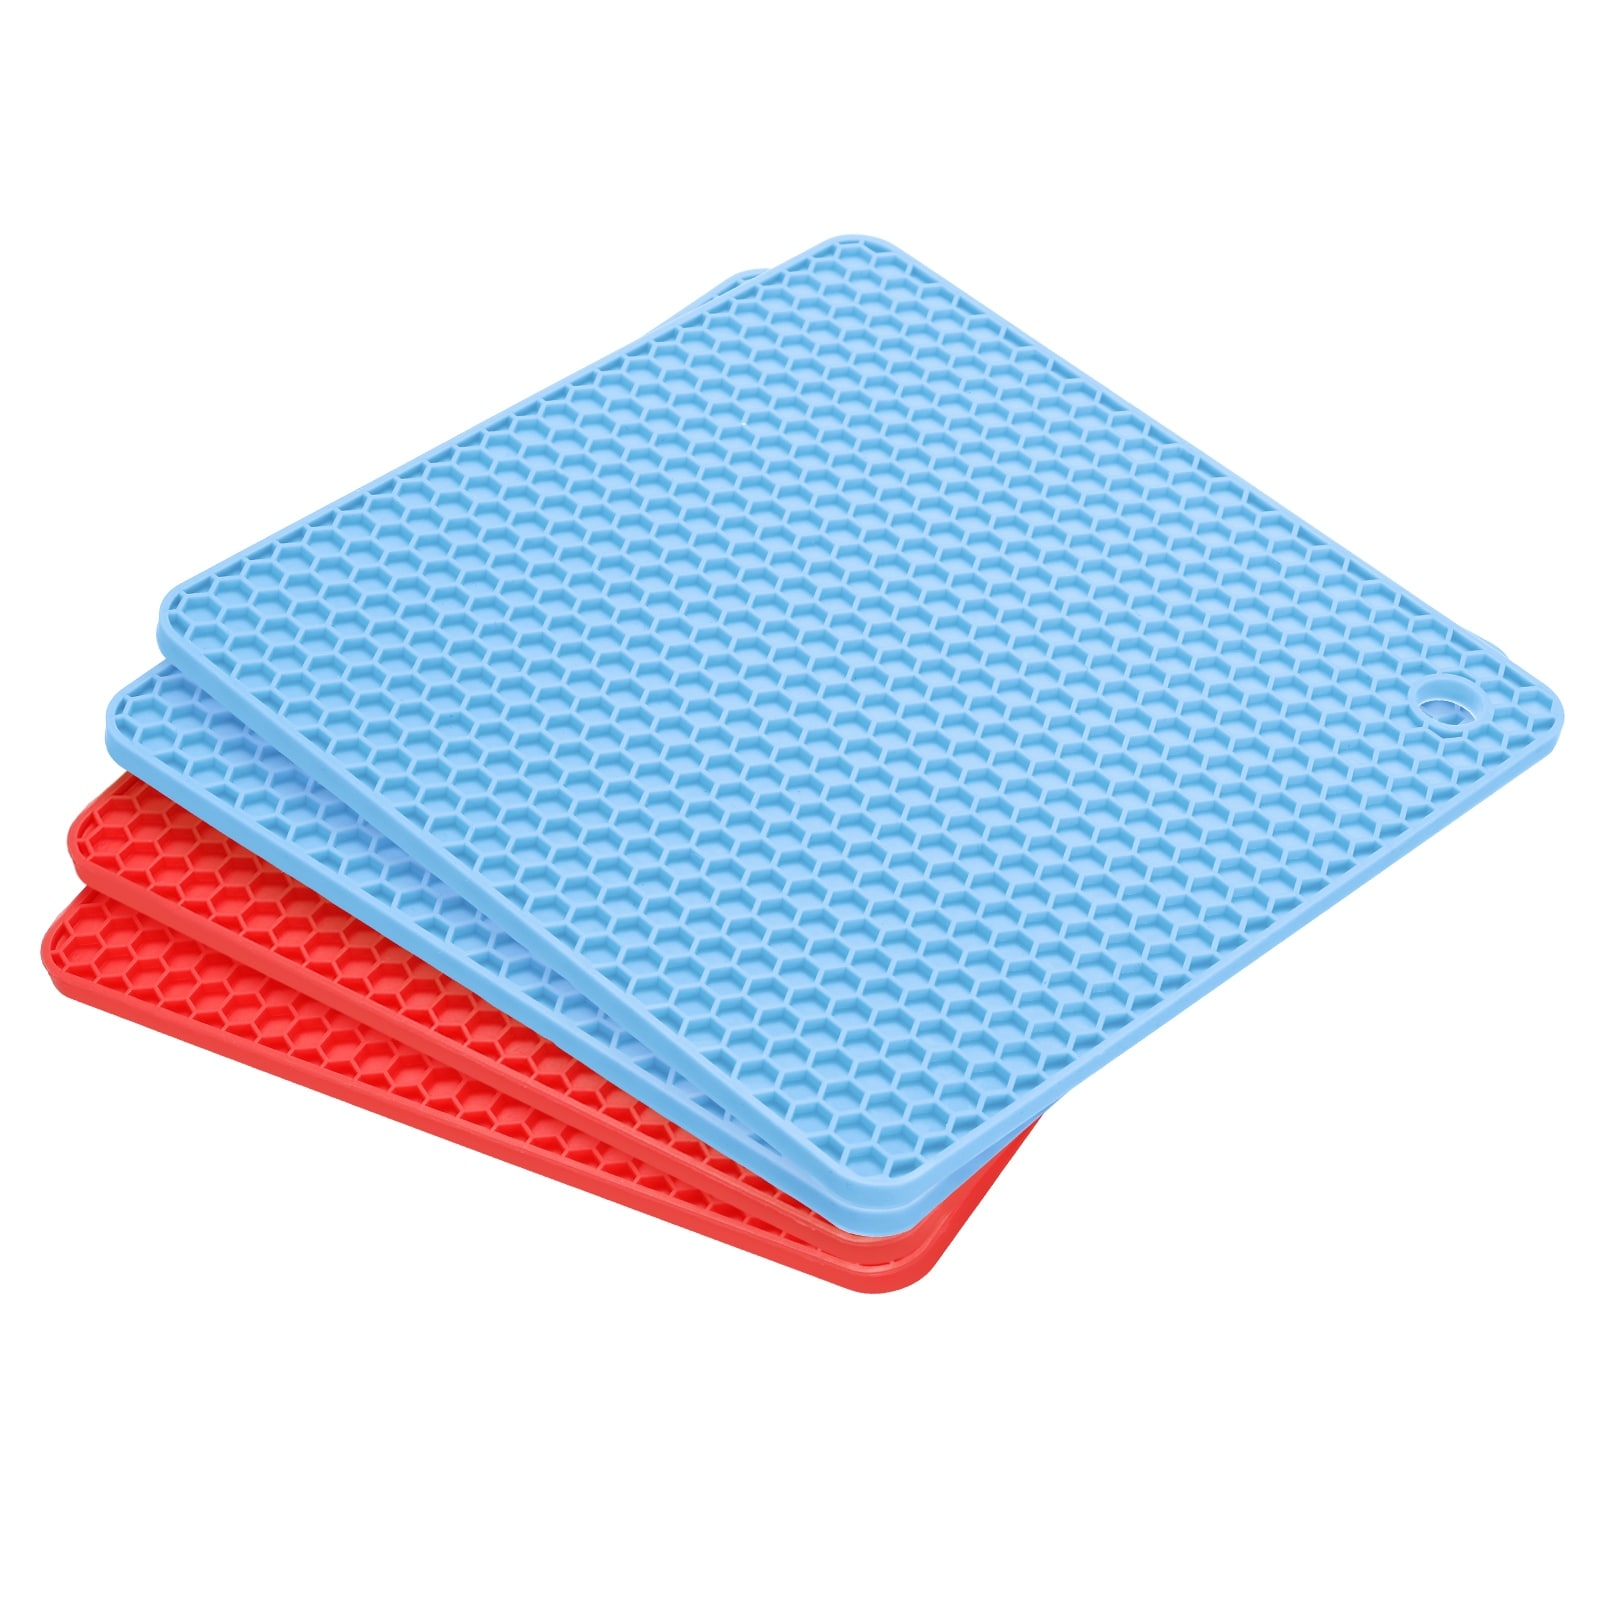 Silicone Trivet Mats, Silicone Pot Holders for Hot Pots and Pans, Heat  Resistant Counter Mats for Tables, Countertops, Spoon Rest and Large  Coasters